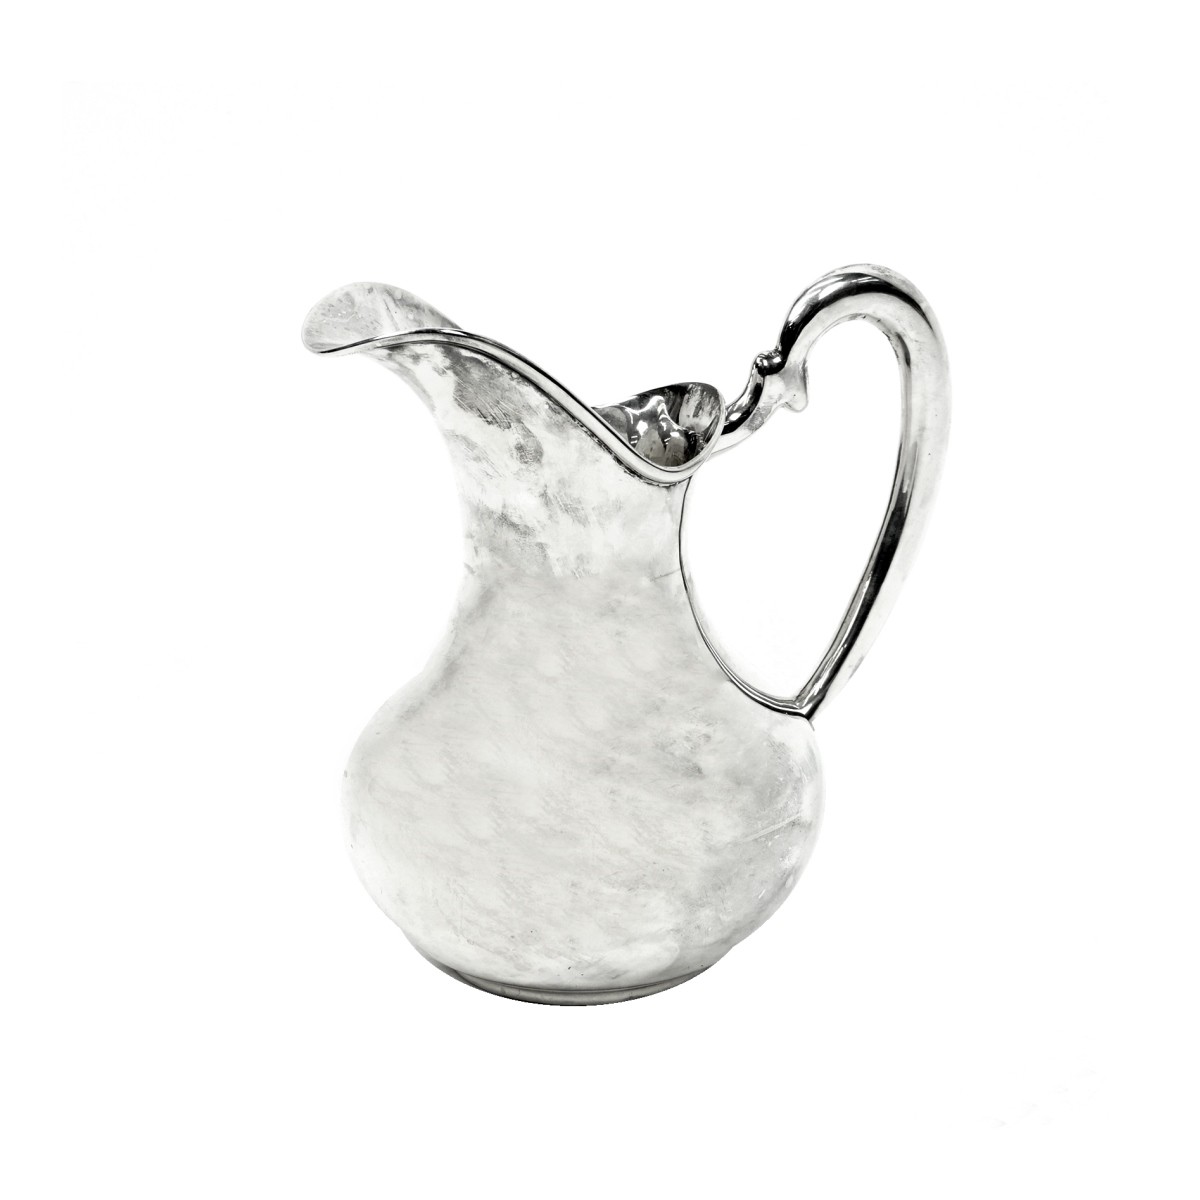 Vicenza 900 Silver Pitcher